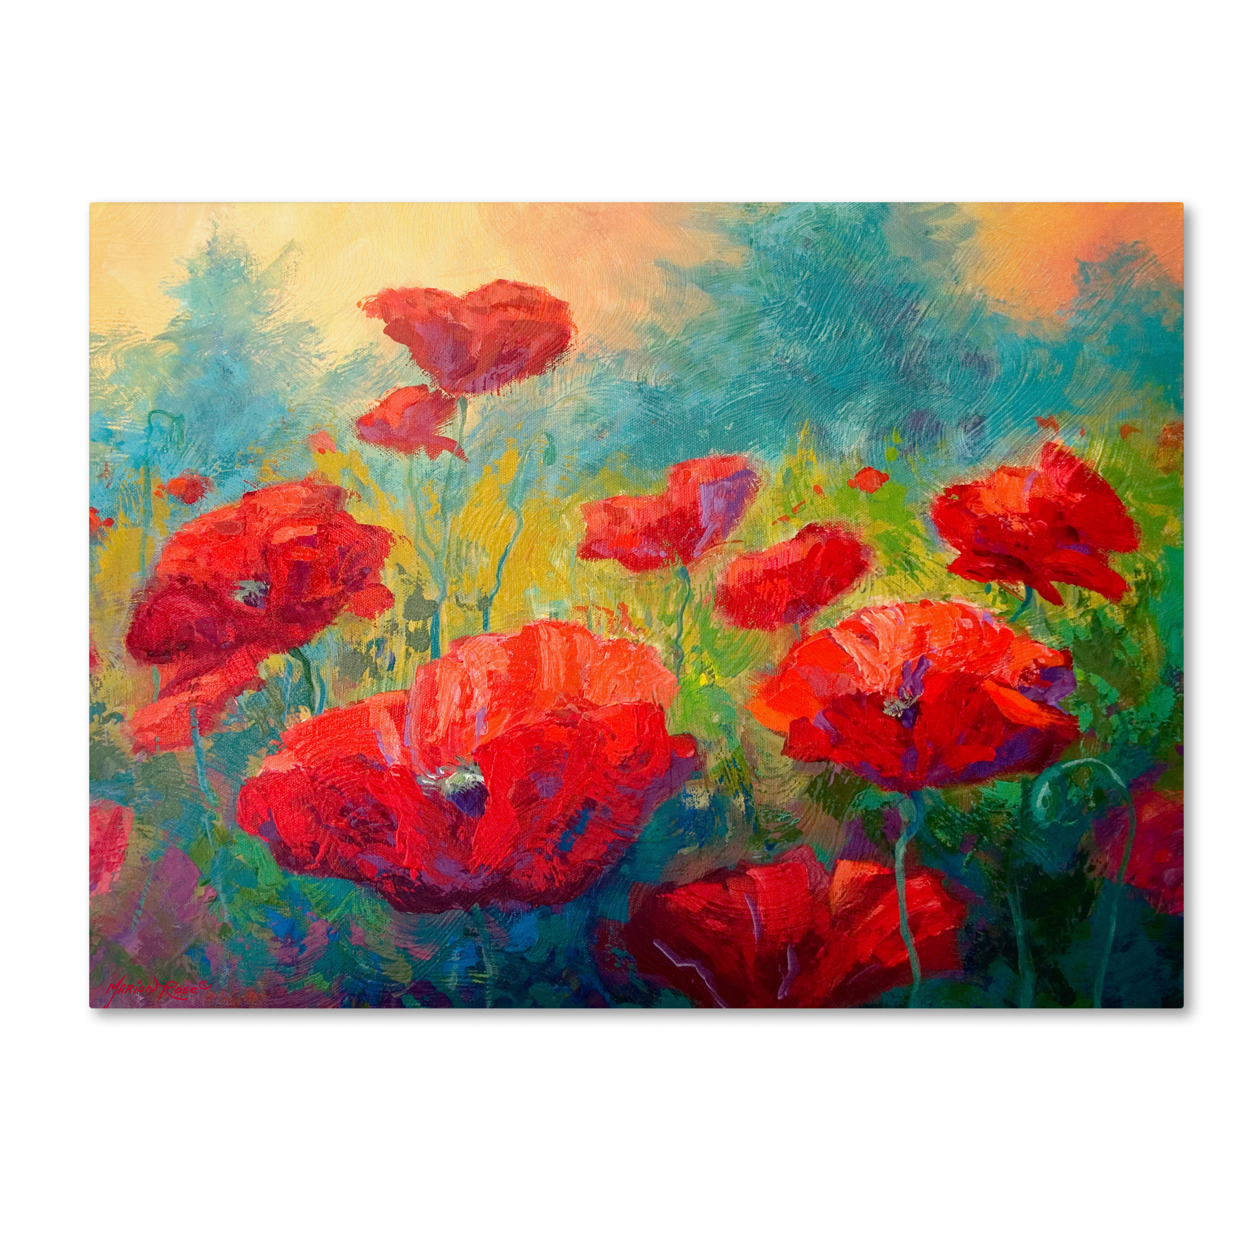 Marion Rose 'Field Of Poppies' Ready To Hang Canvas Art 18 X 24 Inches Made In USA